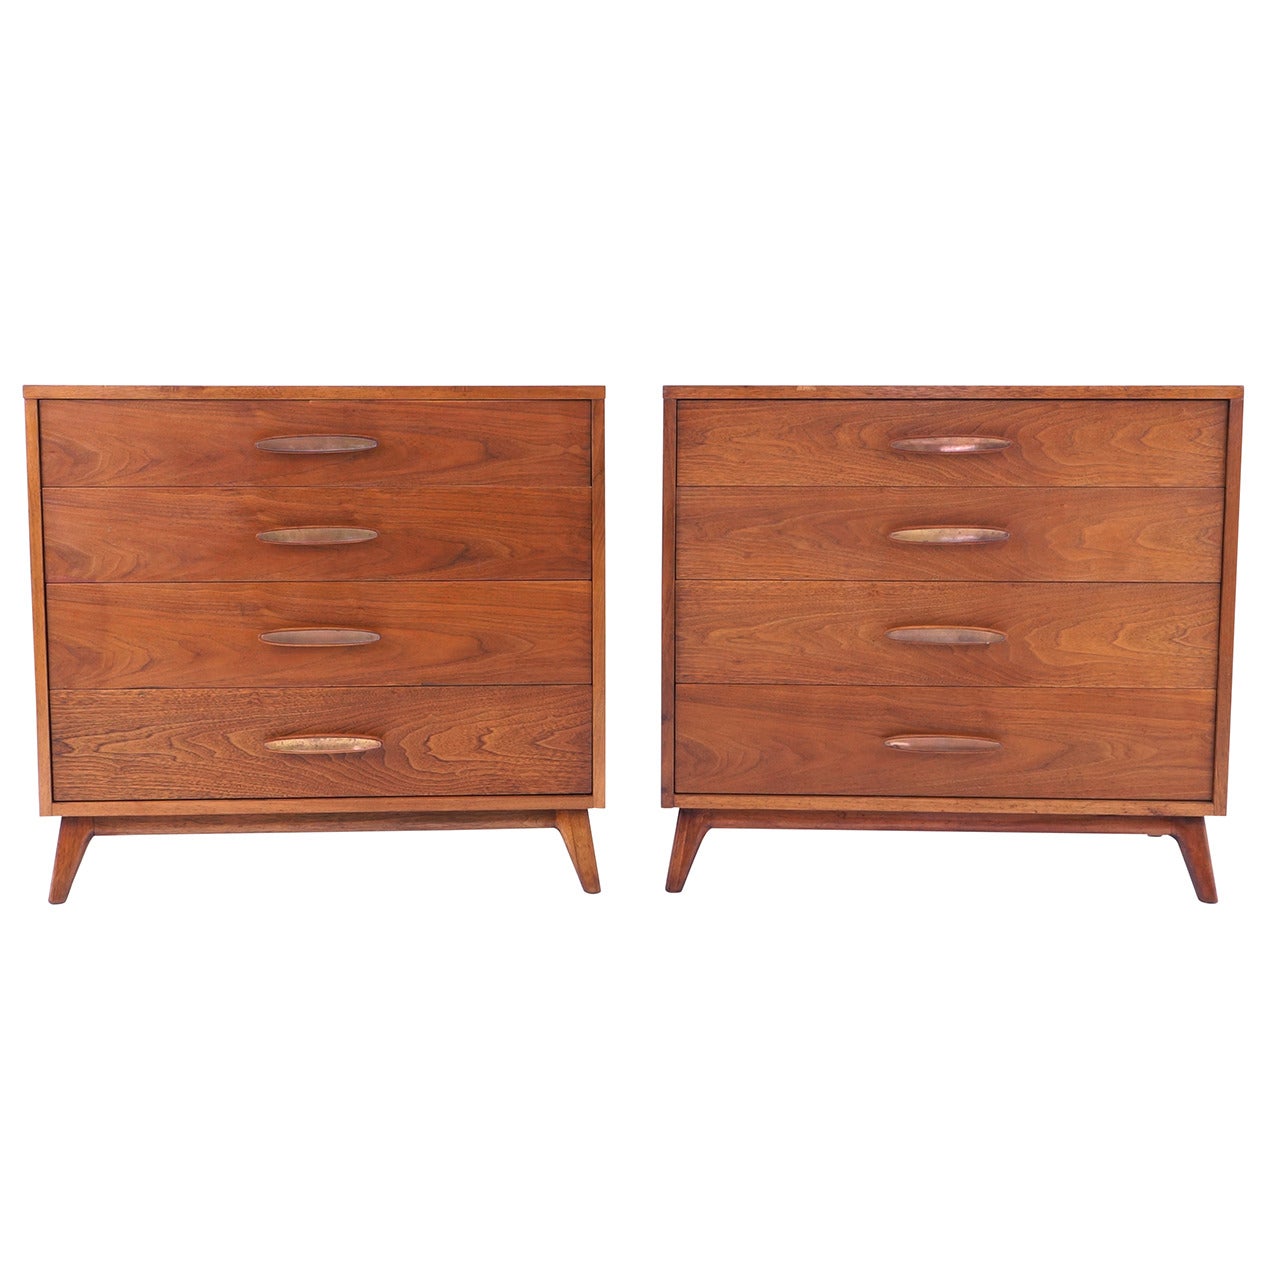 Pair of Heritage Henredon Dressers or Cabinets